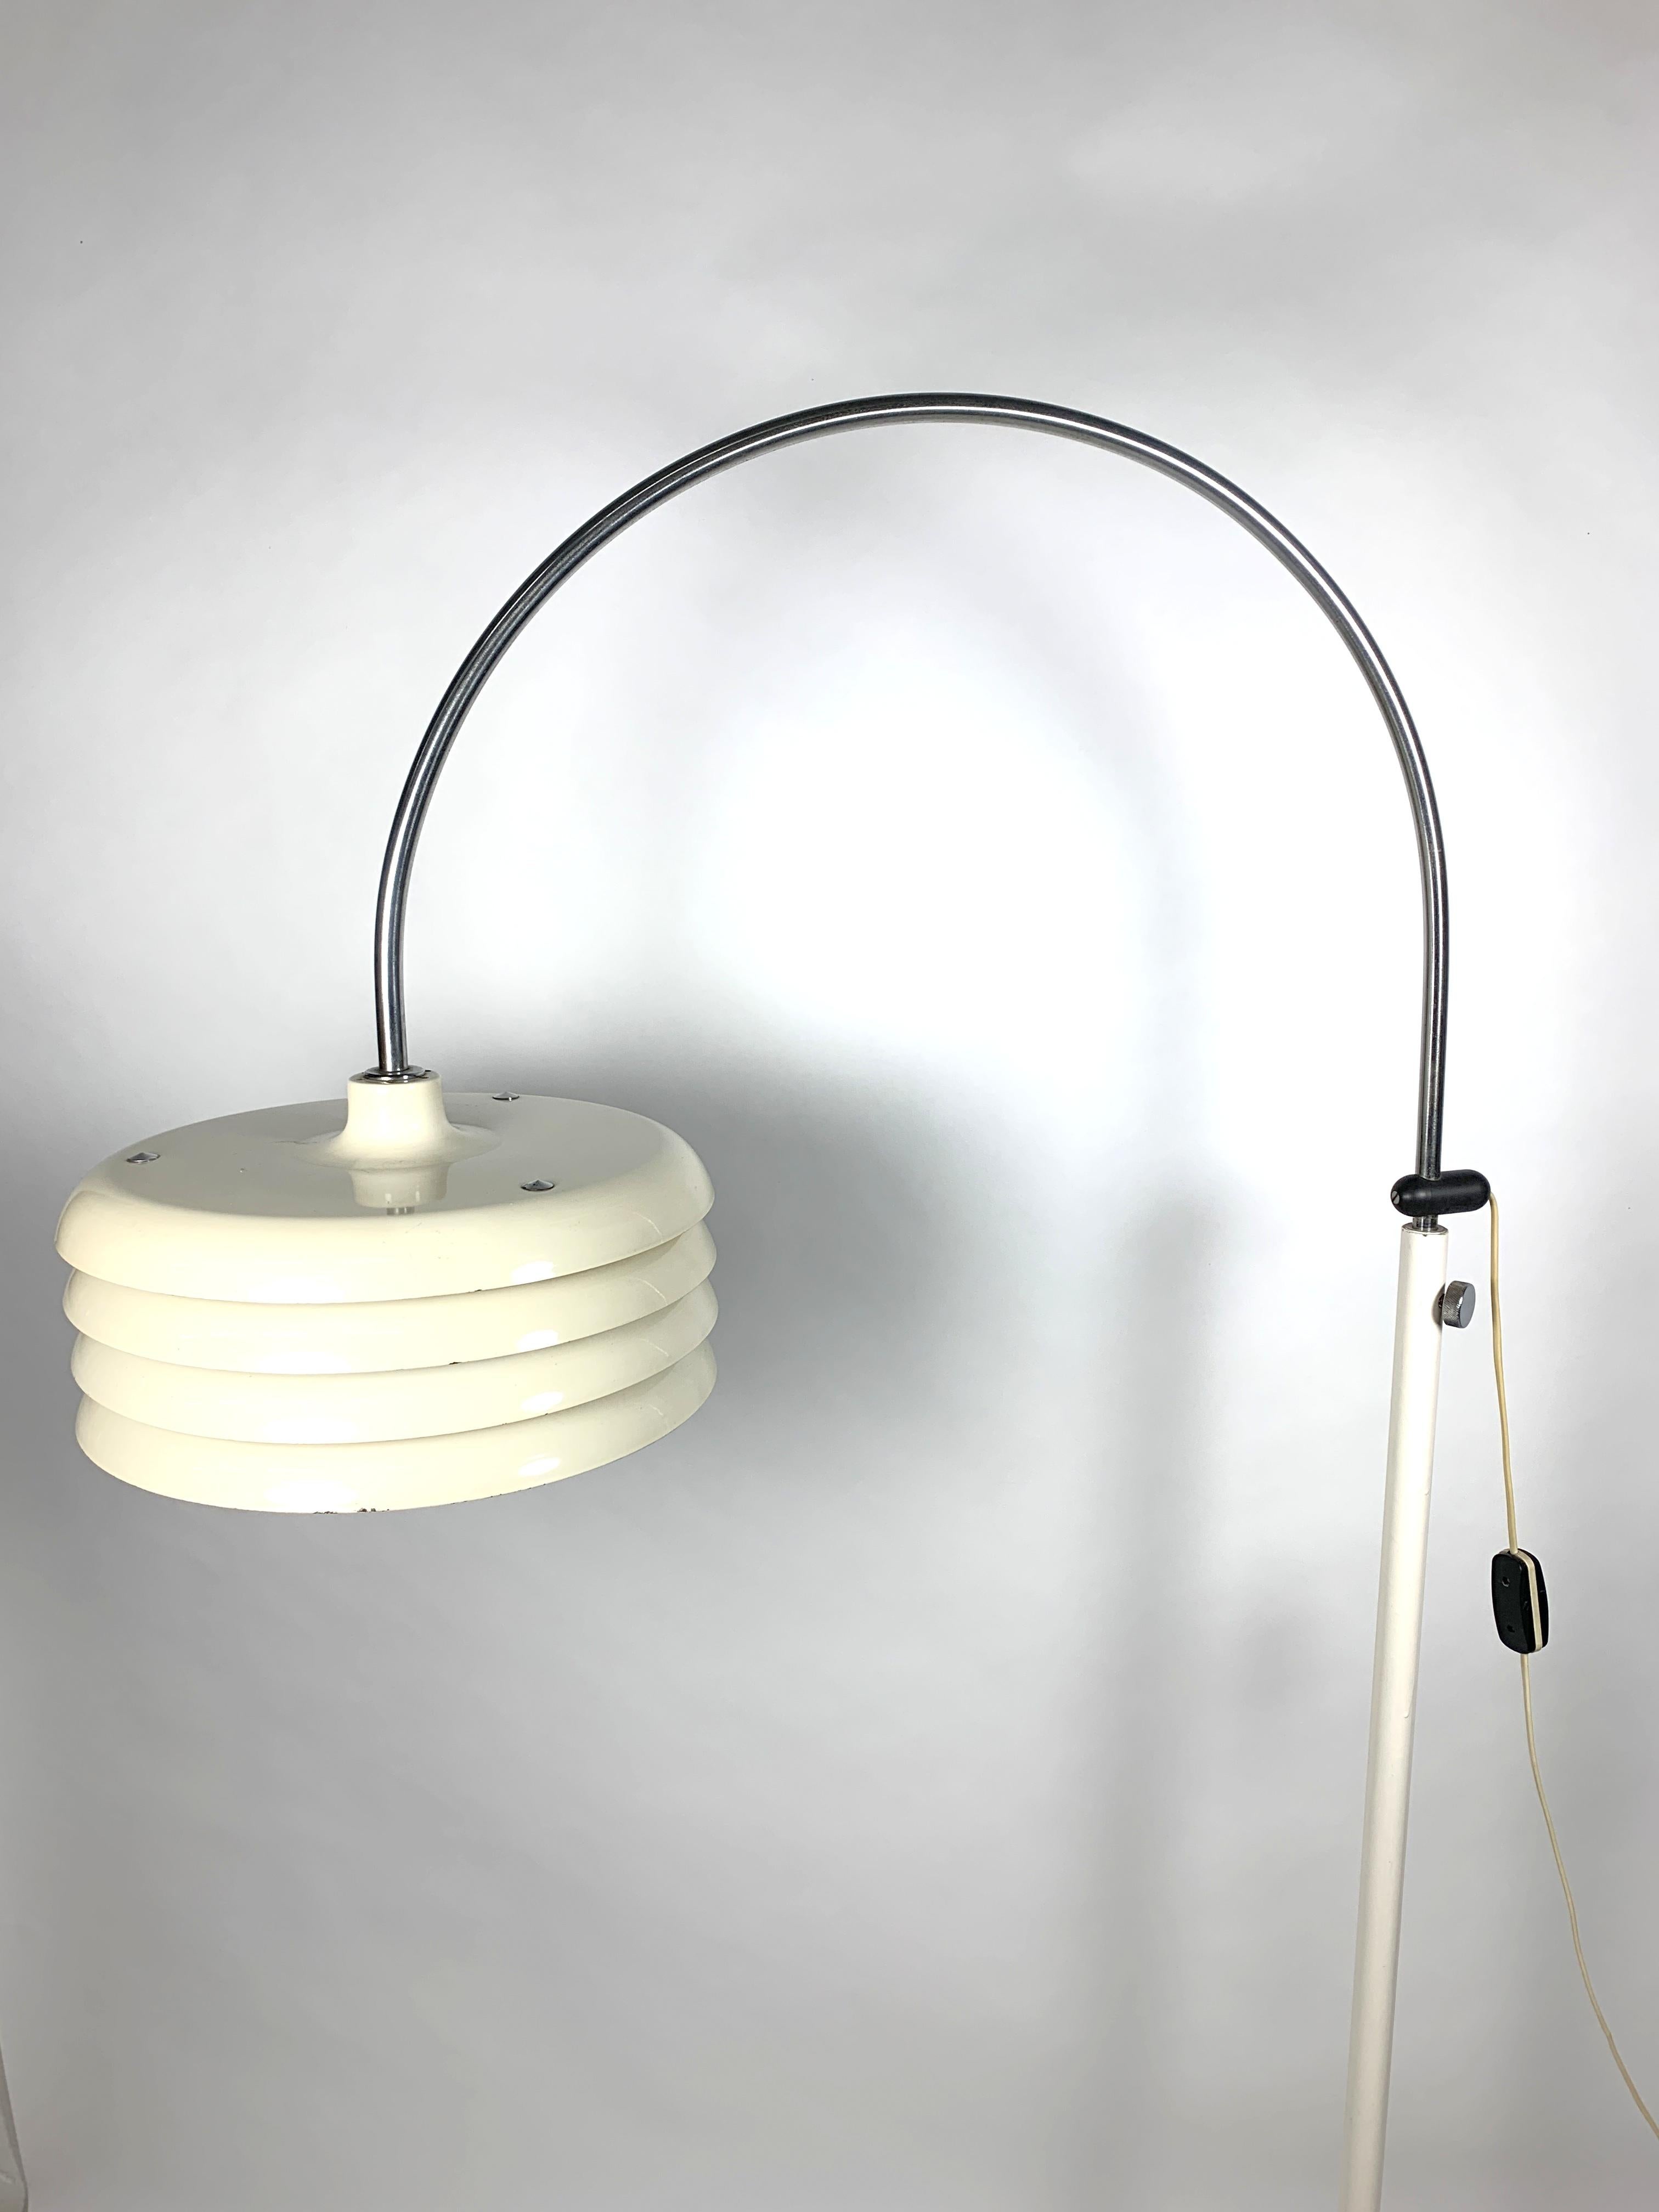 Iconic floor lamp designed by designer Tamas Borsfay. Enamel paint coated and nickel-plated floor lamp has adjustable height, it's in working order and good condition.
  